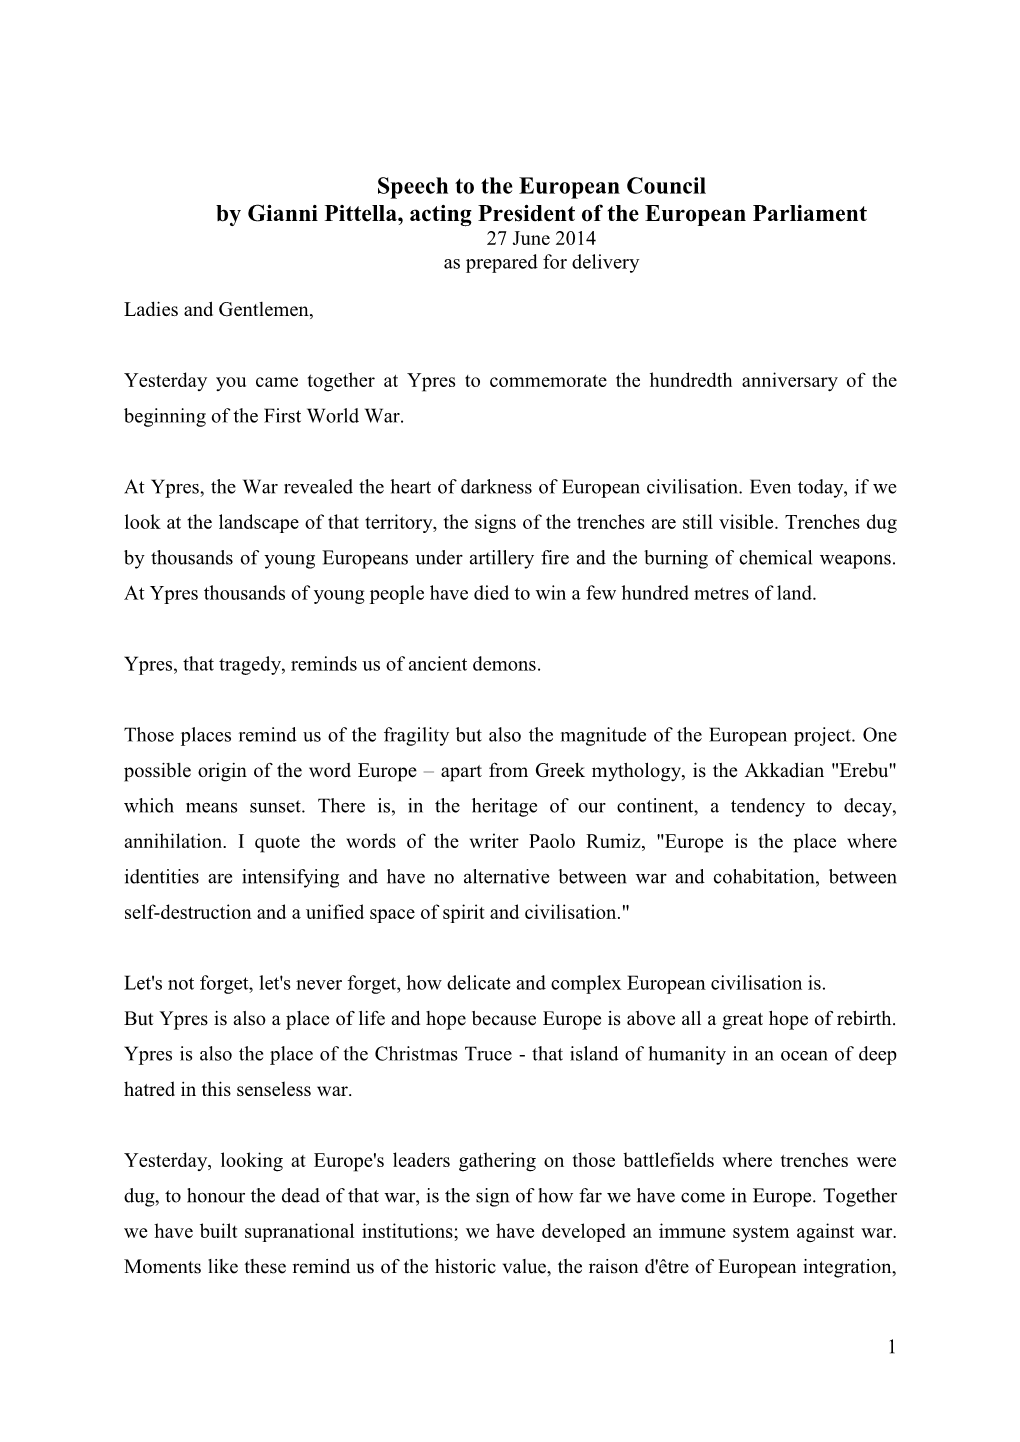 Speech to the European Council by Gianni Pittella, Acting President of the European Parliament 27 June 2014 As Prepared for Delivery